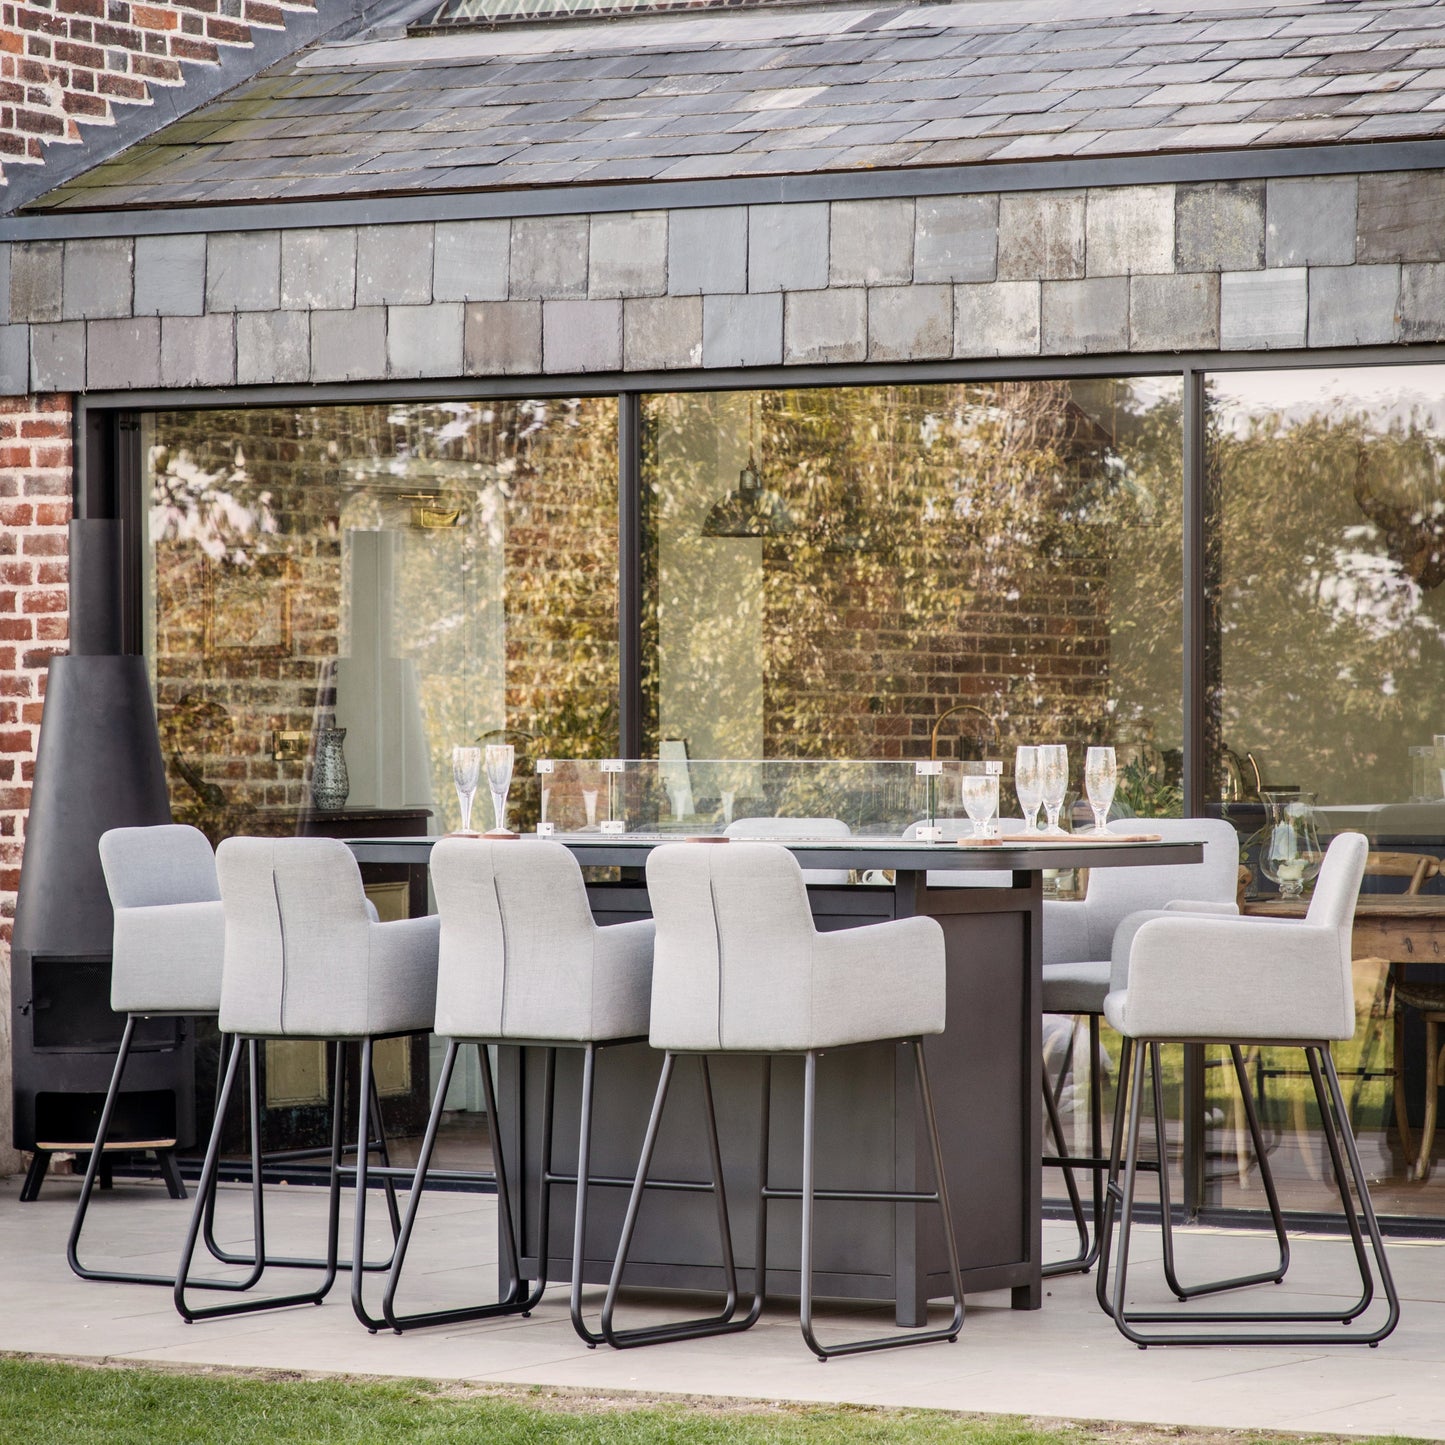 Load image into Gallery viewer, A patio with a Ferrers 8 Seater Bar Set from Kikiathome.co.uk, enhancing interior decor.
